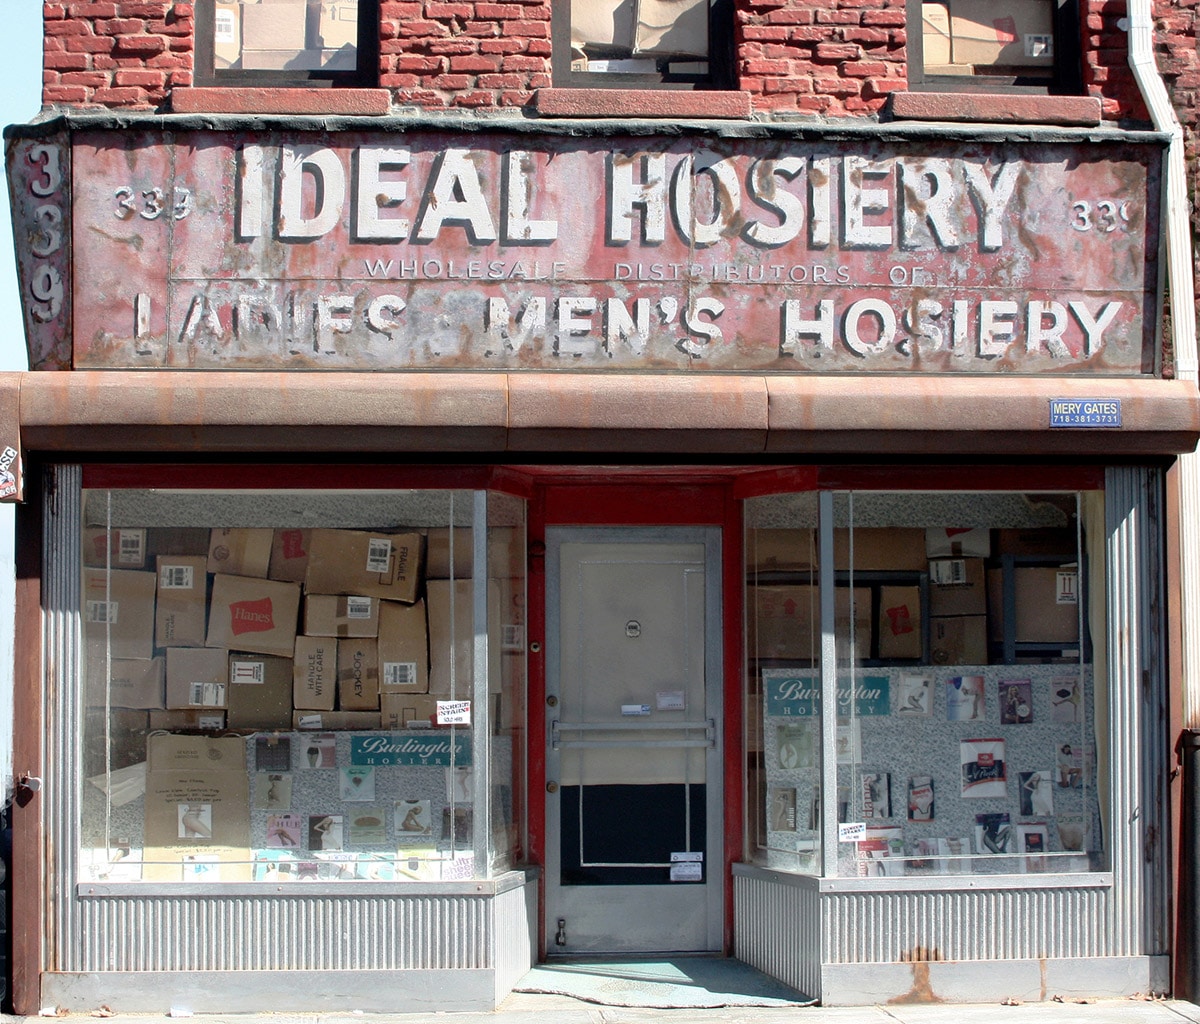 NYC Storefronts Miniature Models by Randy Hage